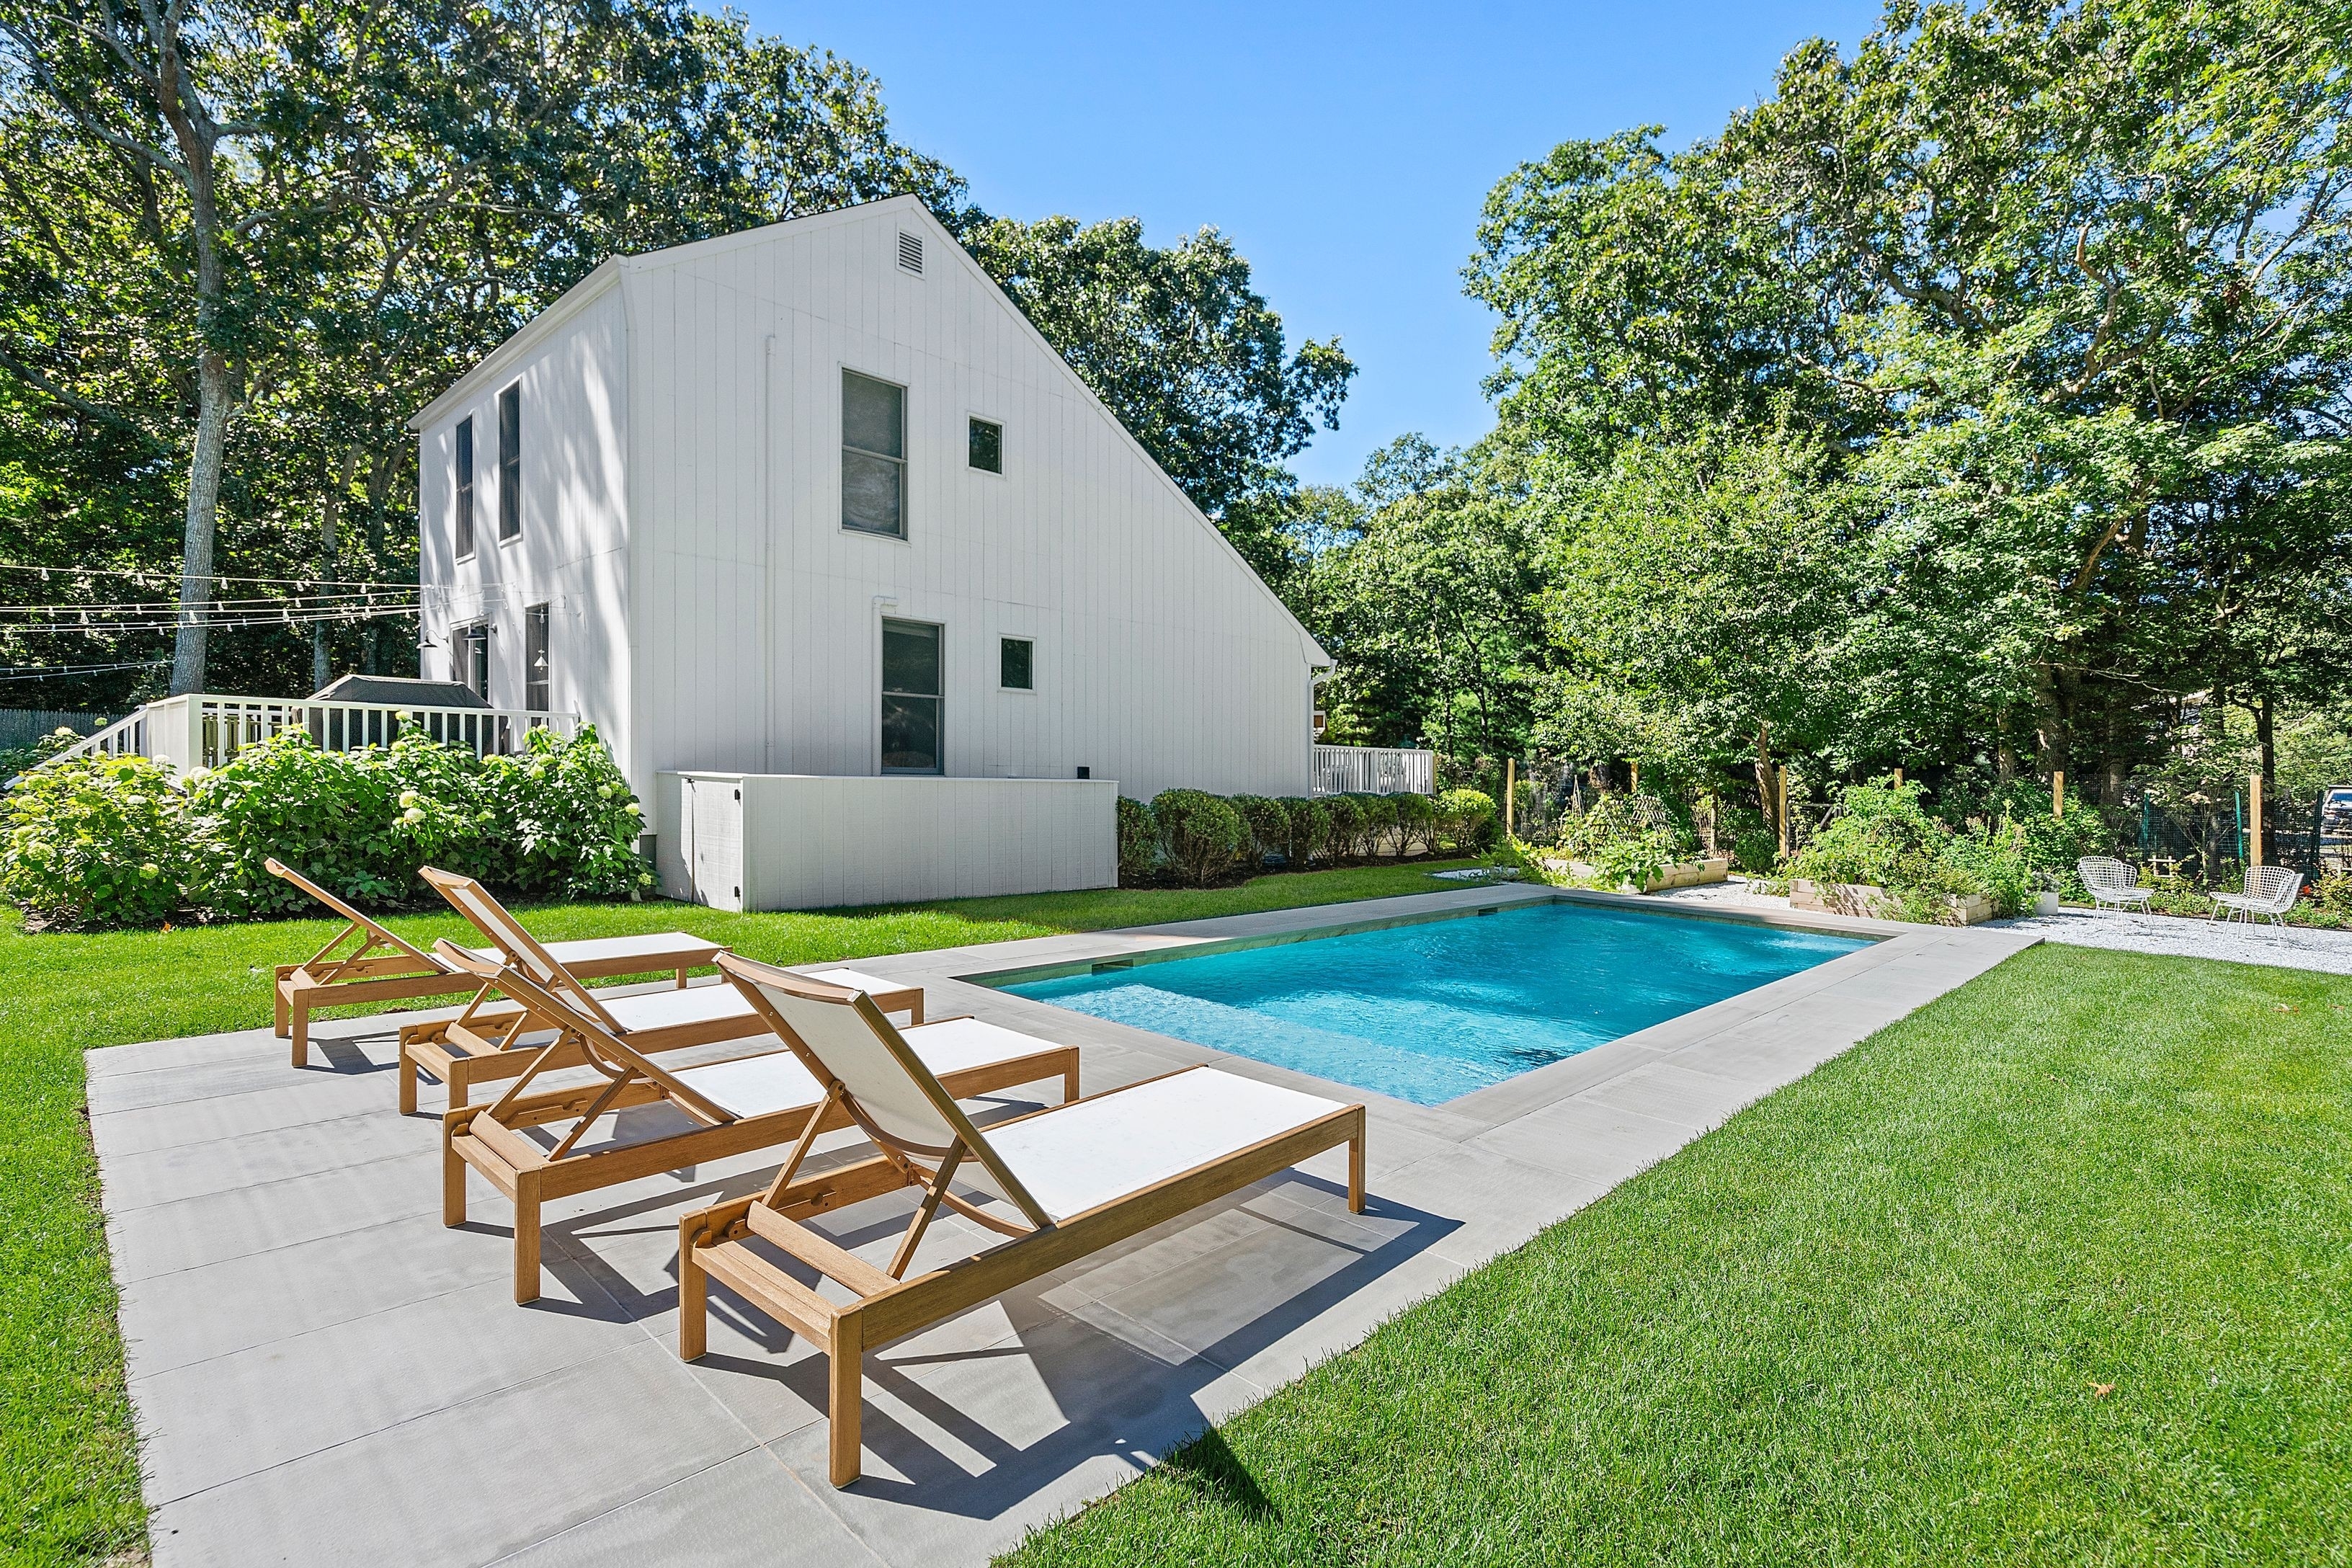 Single Family Home for Sale at Springs, East Hampton, New York 11937